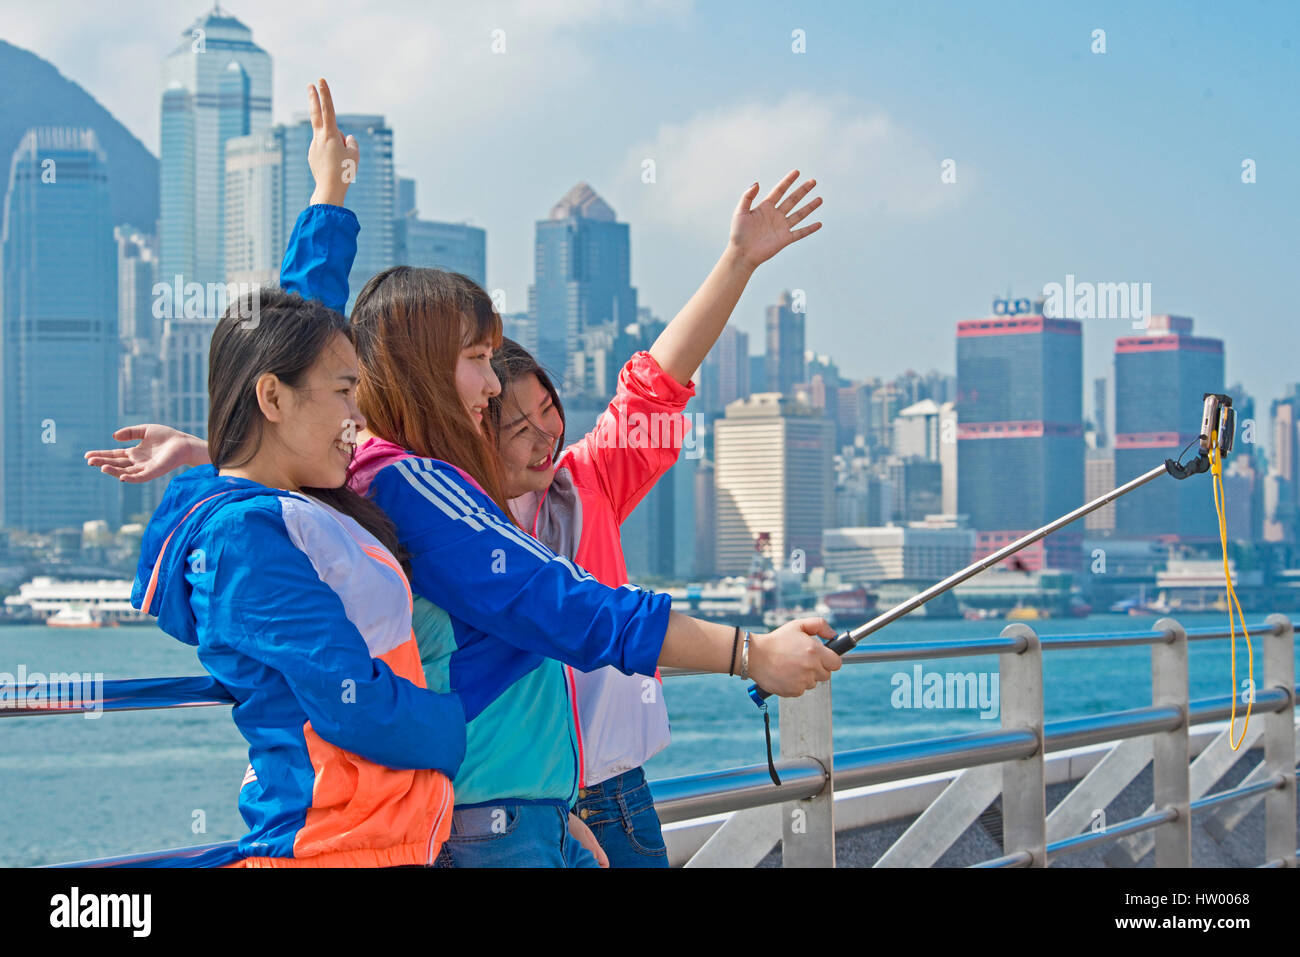 3 teenage asian girls taking a selfie stick portrait with their hands in the air smiling and laughing from the Kowloon Public Pier in Hong Kong. Stock Photo